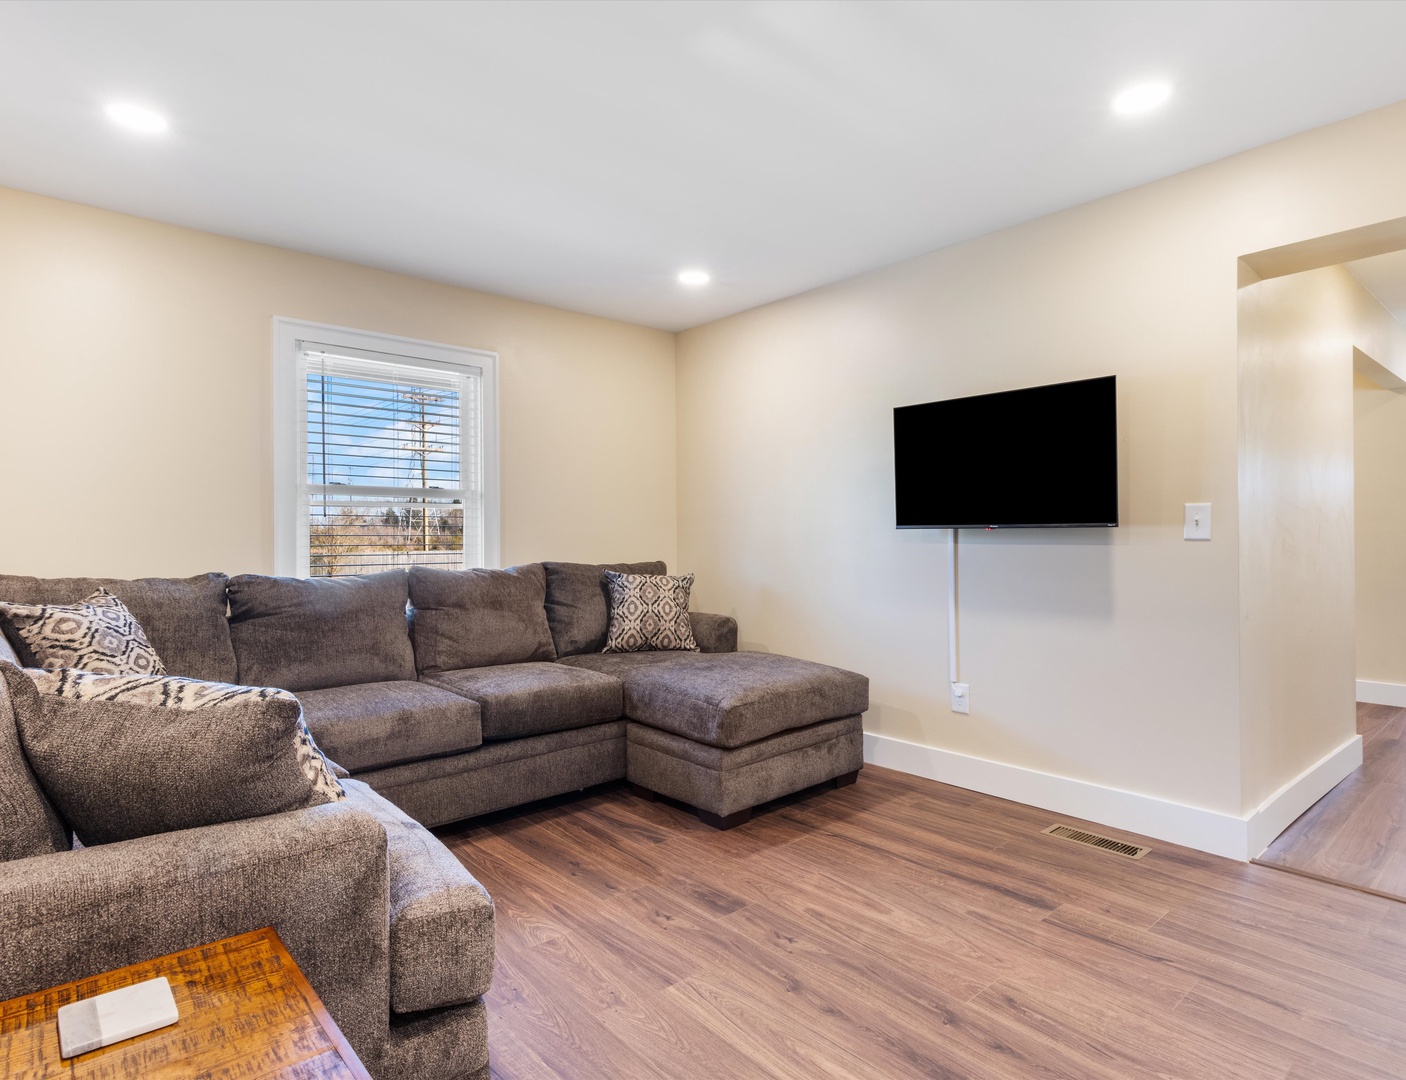 Second living room with lush seating and Smart TV